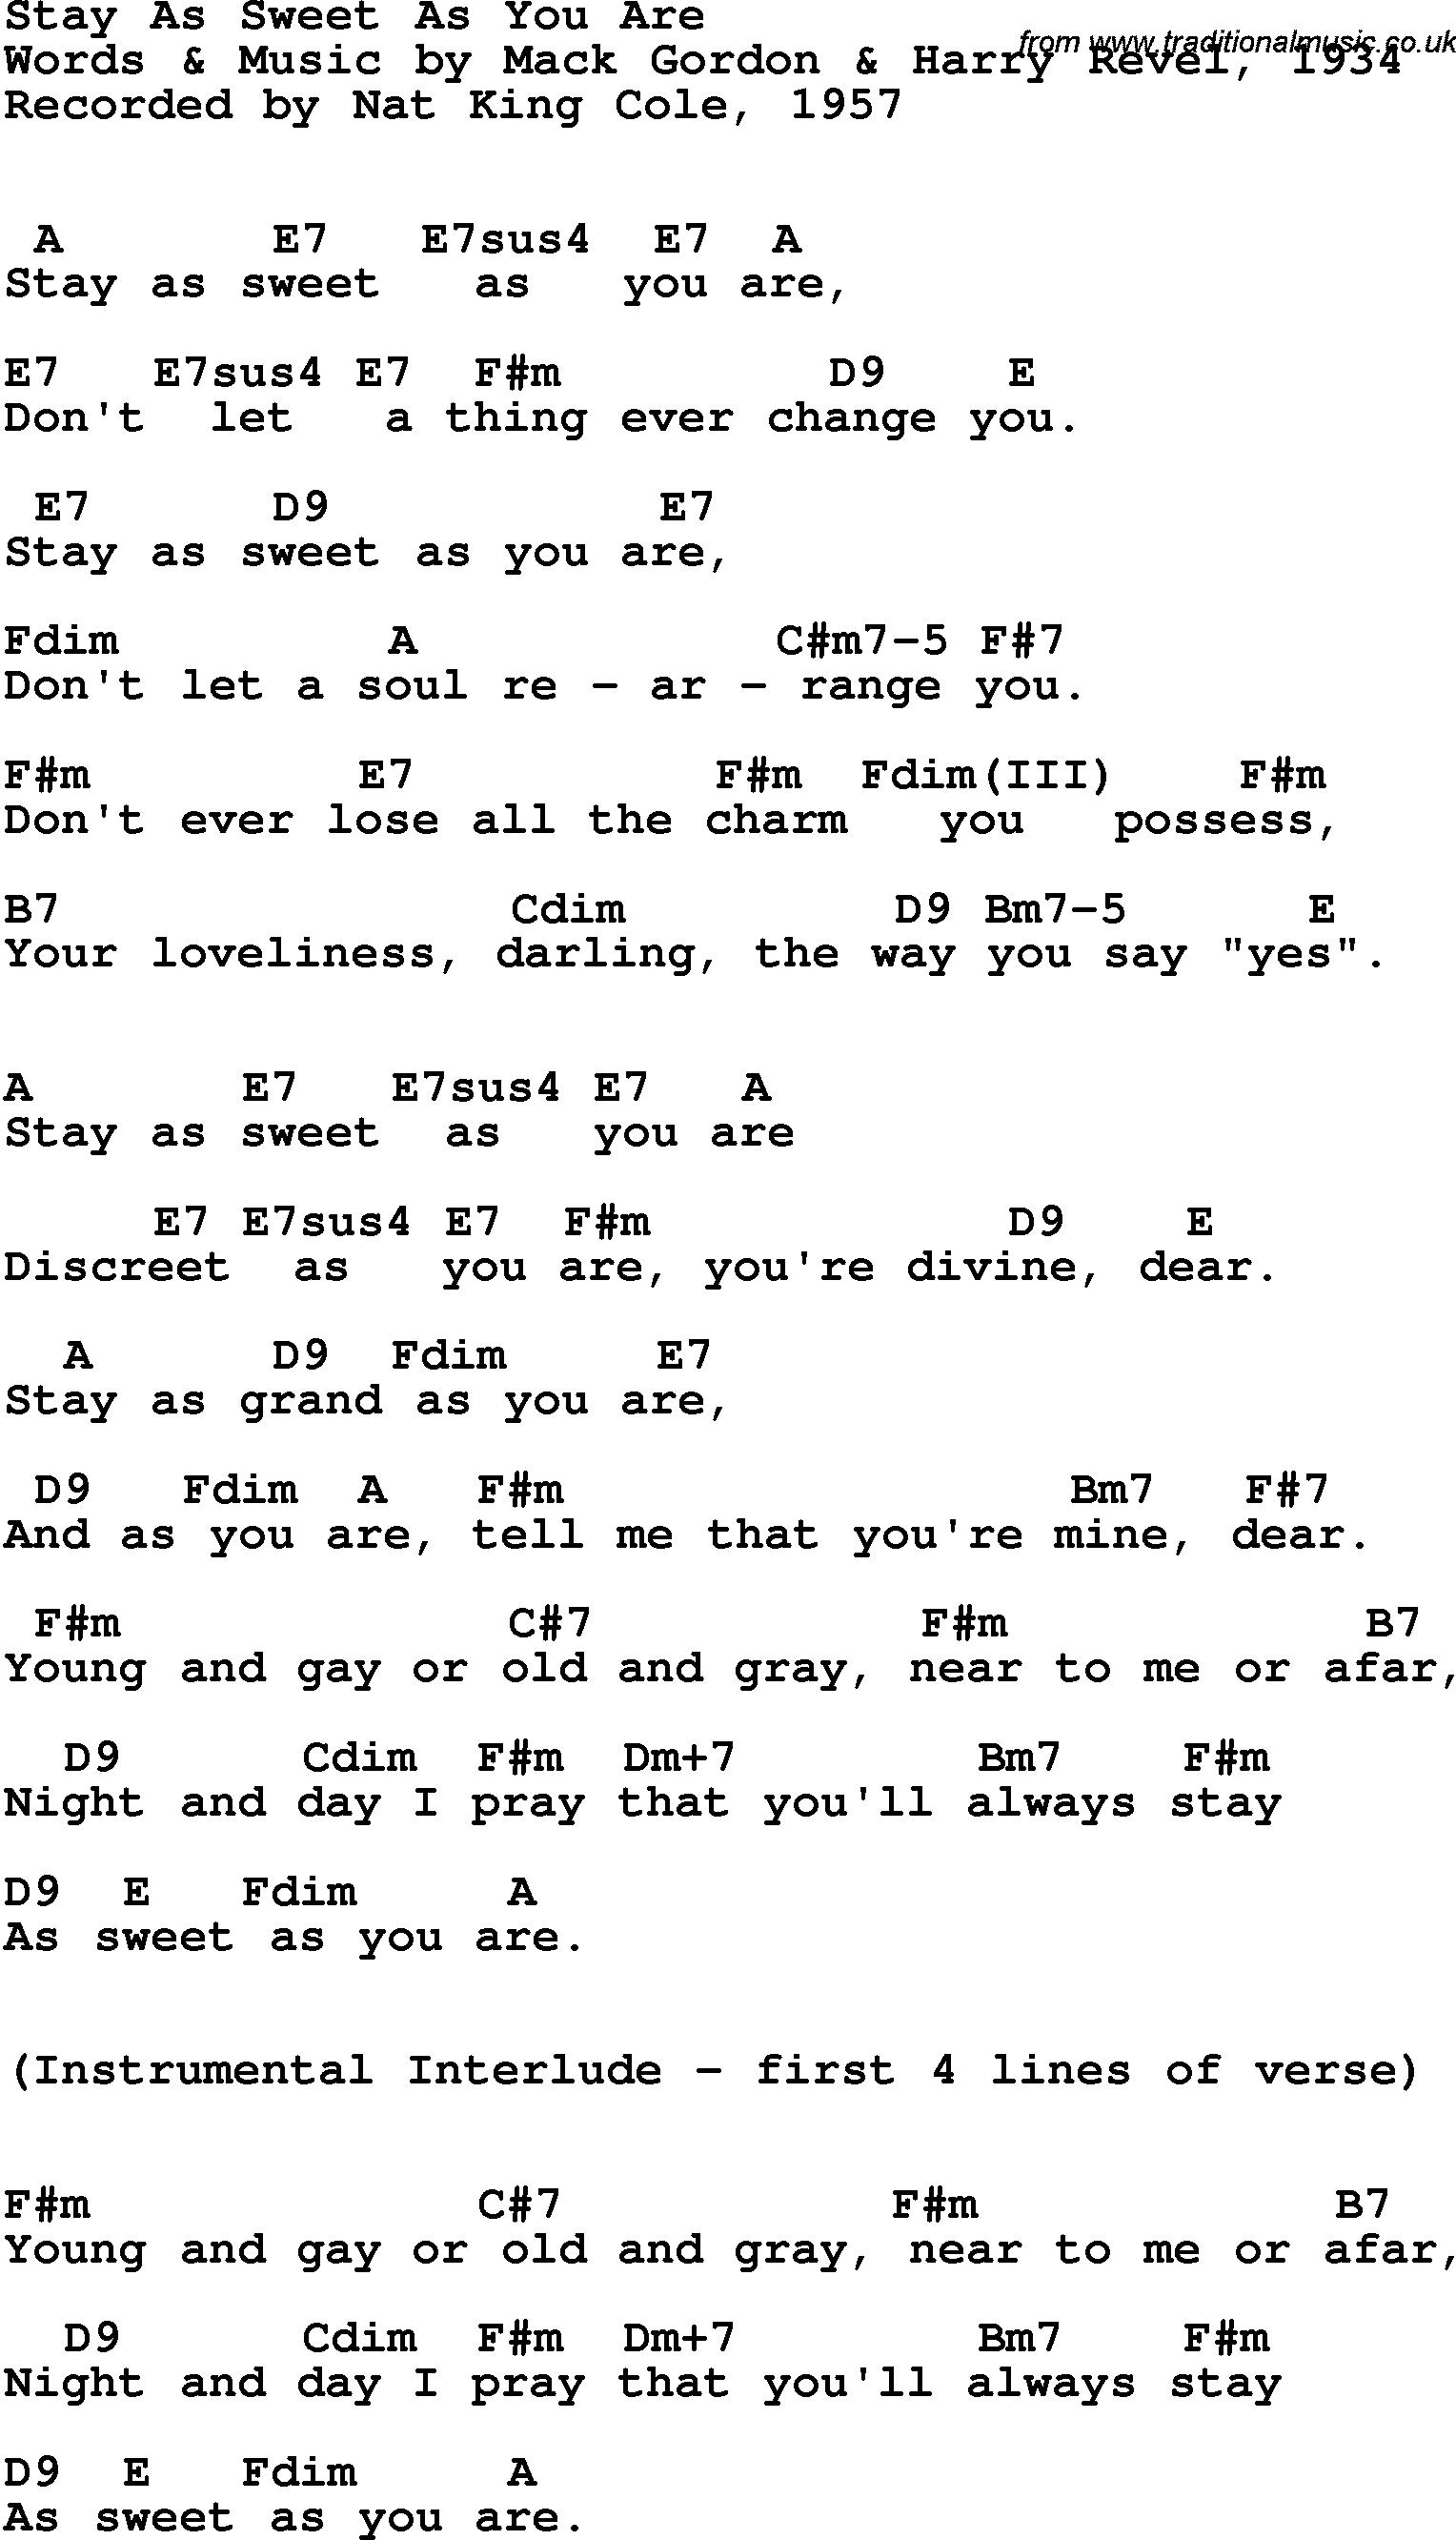 Song Lyrics with guitar chords for Stay As Sweet As You Are - Nat King Cole,  1957